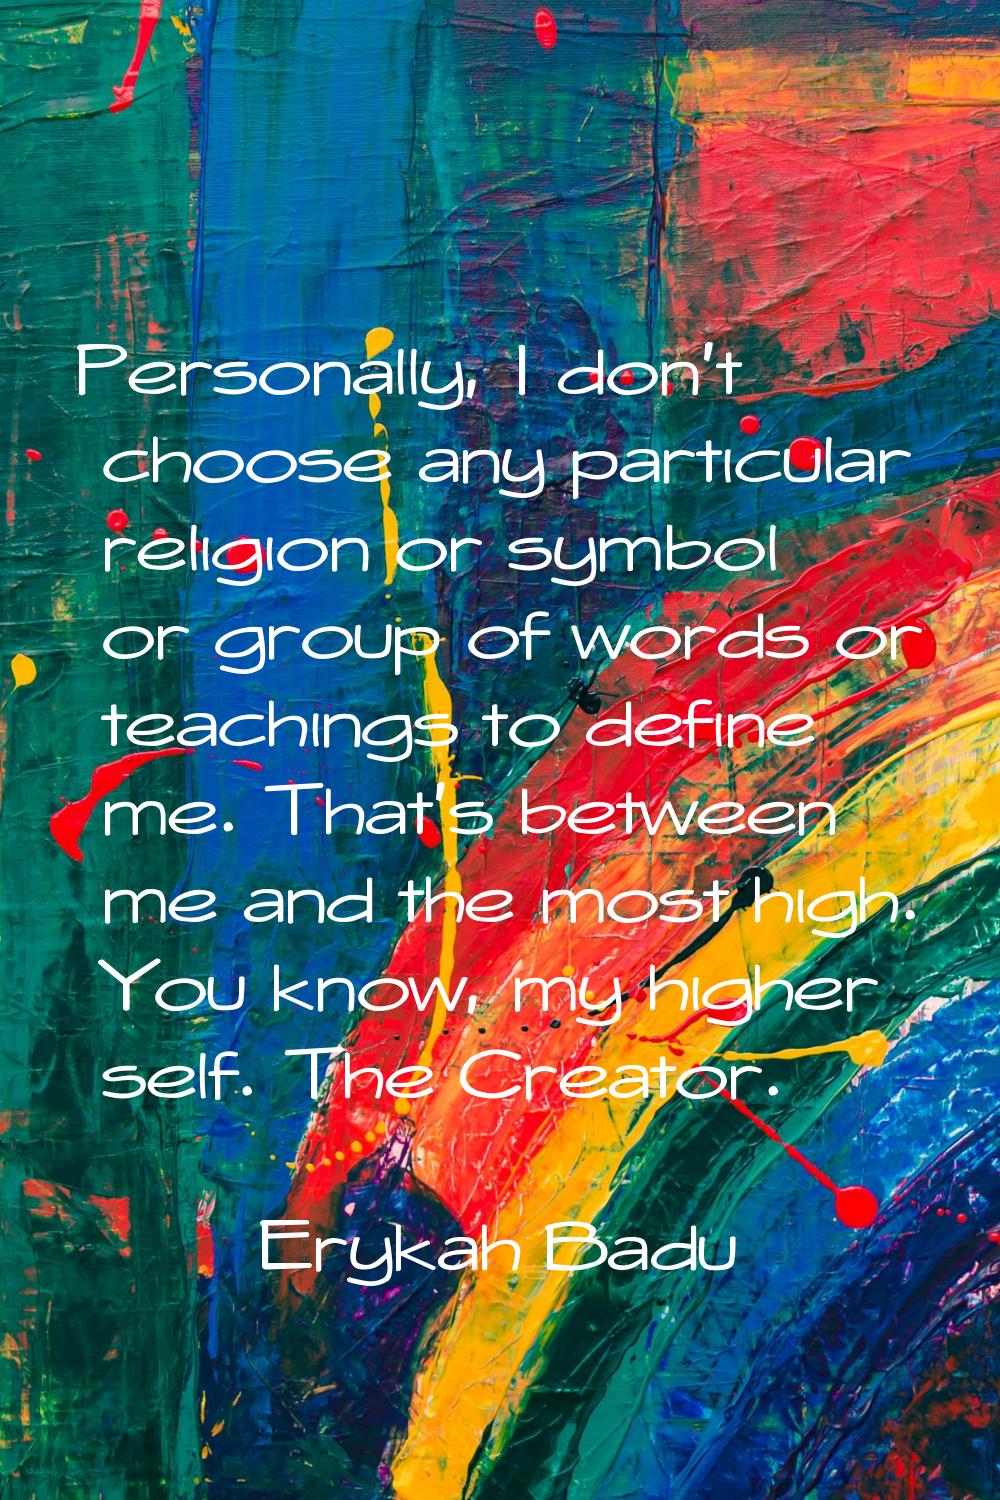 Personally, I don't choose any particular religion or symbol or group of words or teachings to defi